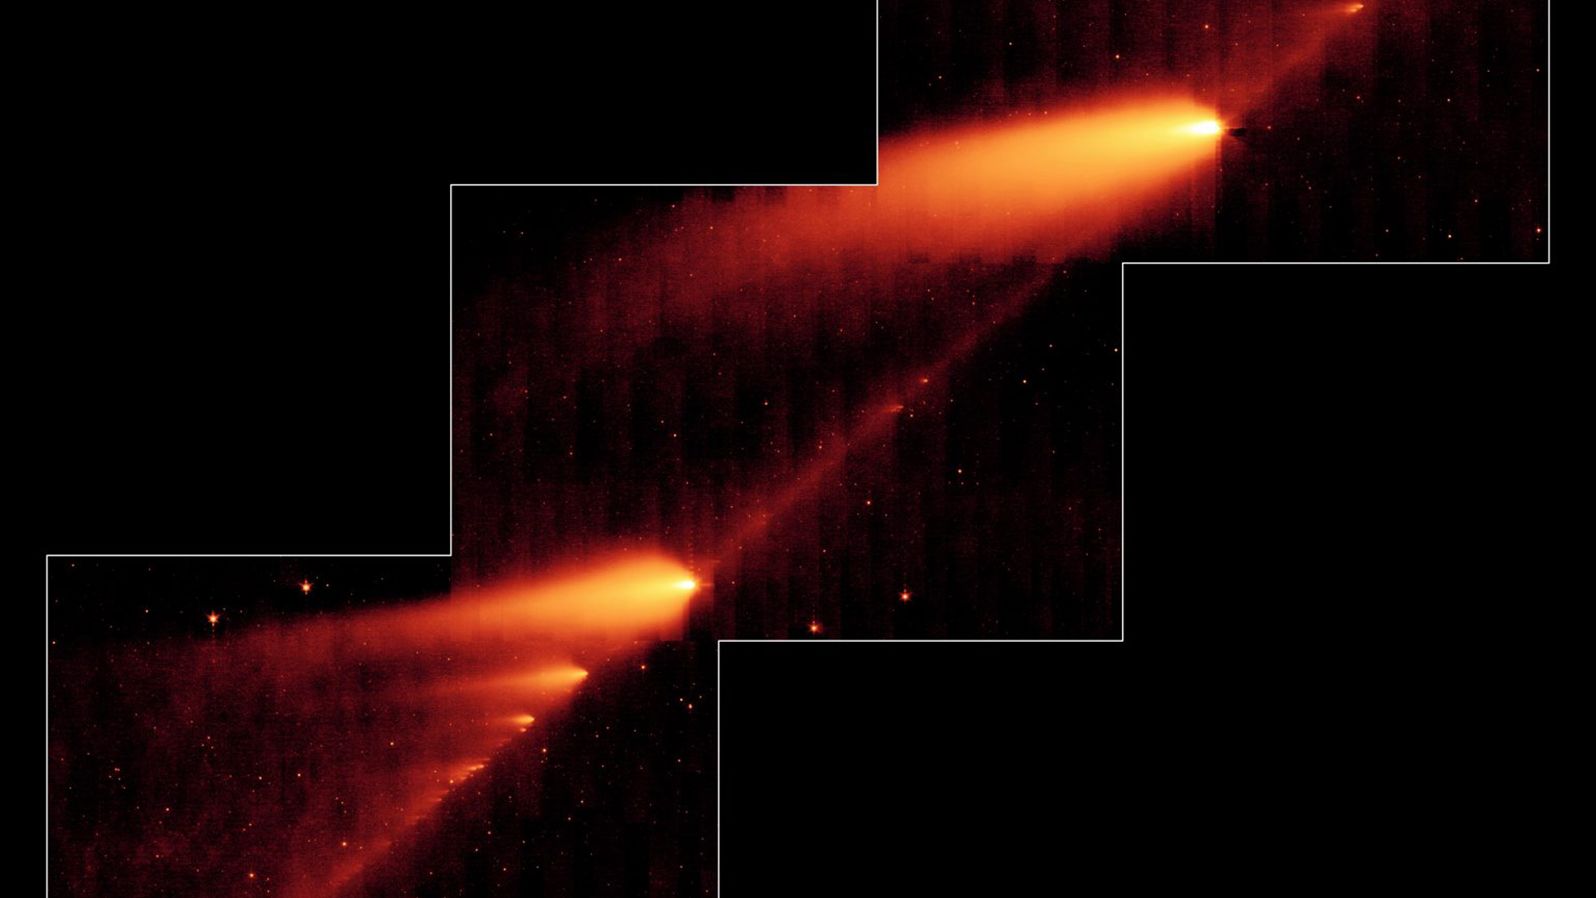 An infrared image from NASA's Spitzer Space Telescope shows the broken comet 73P/Schwassman-Wachmann. The flame-like objects are the comet's fragments and their tails, while the dusty comet trail is the line between the fragments.